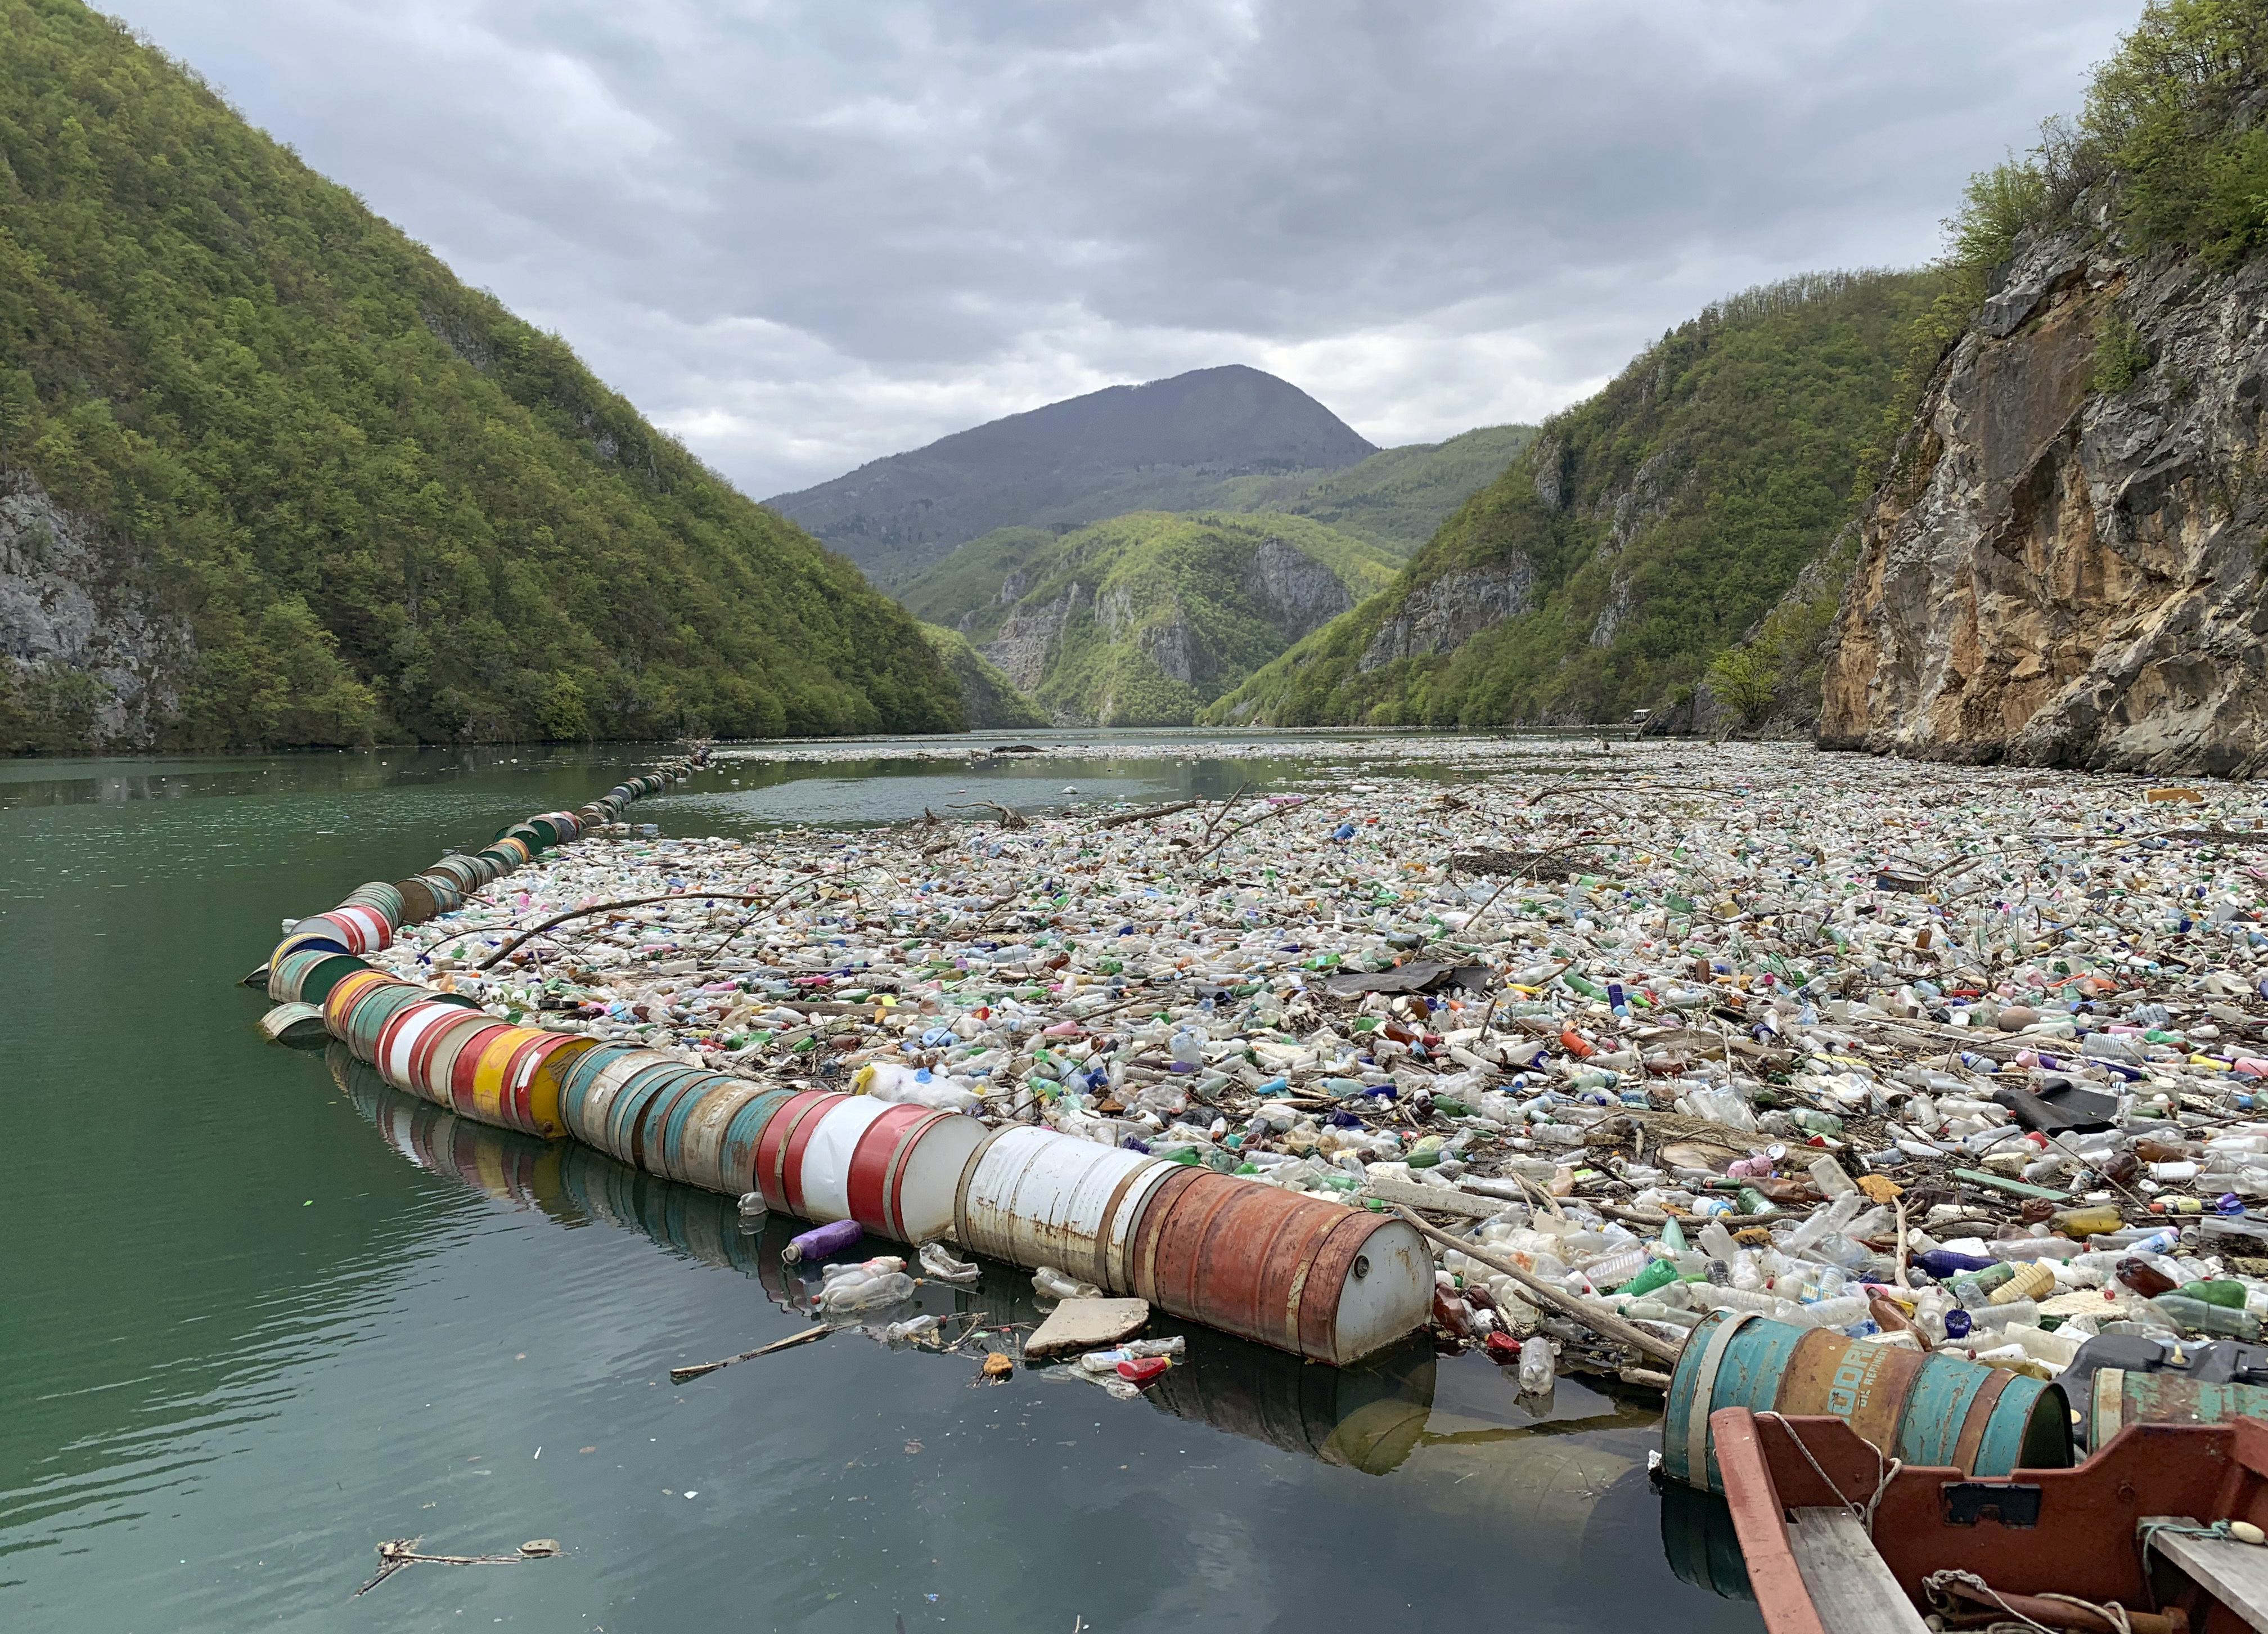 Garbage clogs once crystal clear Bosnia rivers amid neglect